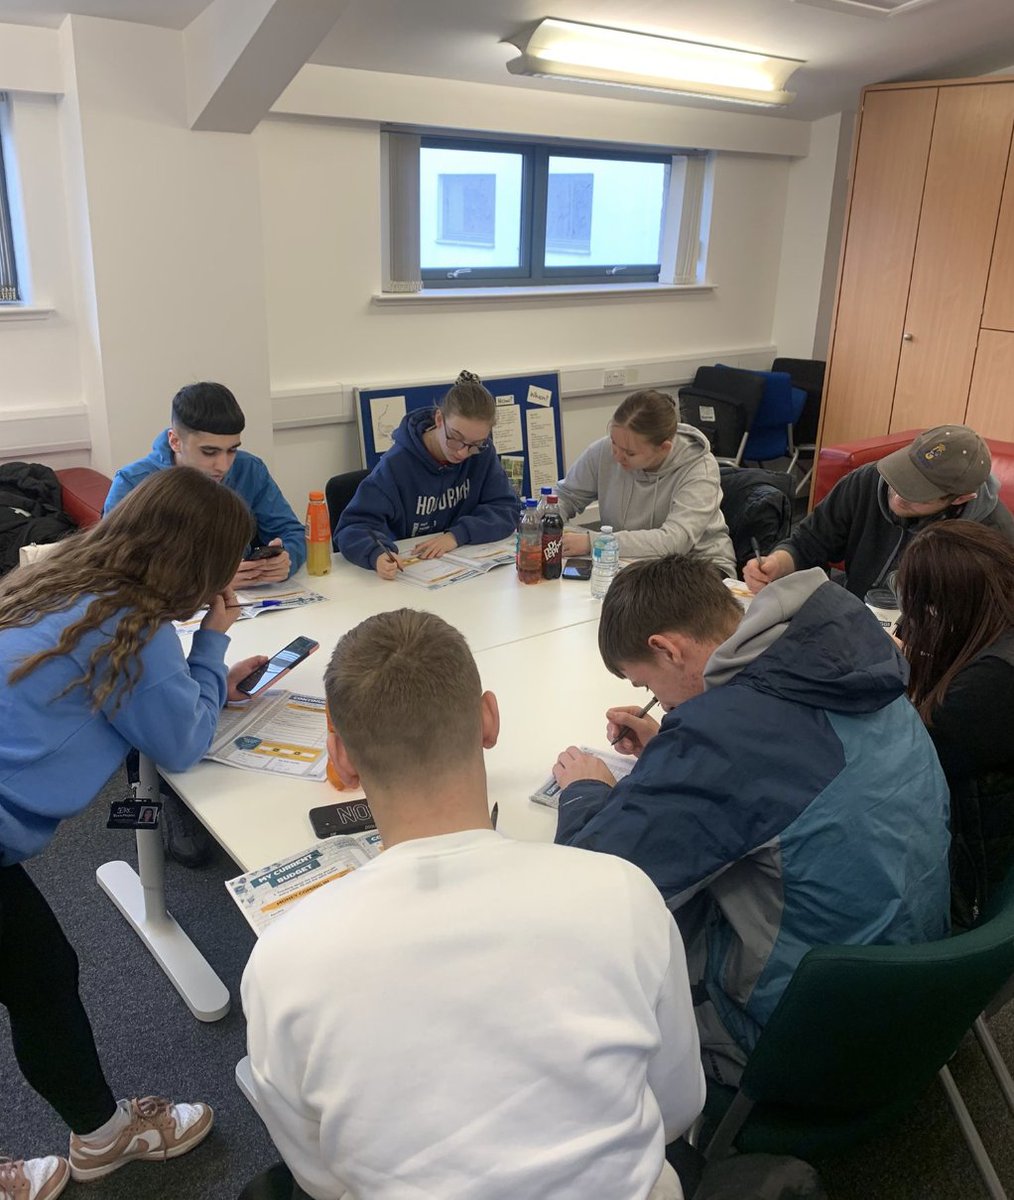 Great turn out for today's personal money management training session with the brilliant @MyBnk @MyBnkScotland! Our @pathfindjobs4u trainees all had the heads down & were working hard through the session content with Adam. Quick lunch break now then back into action! #youthwork…